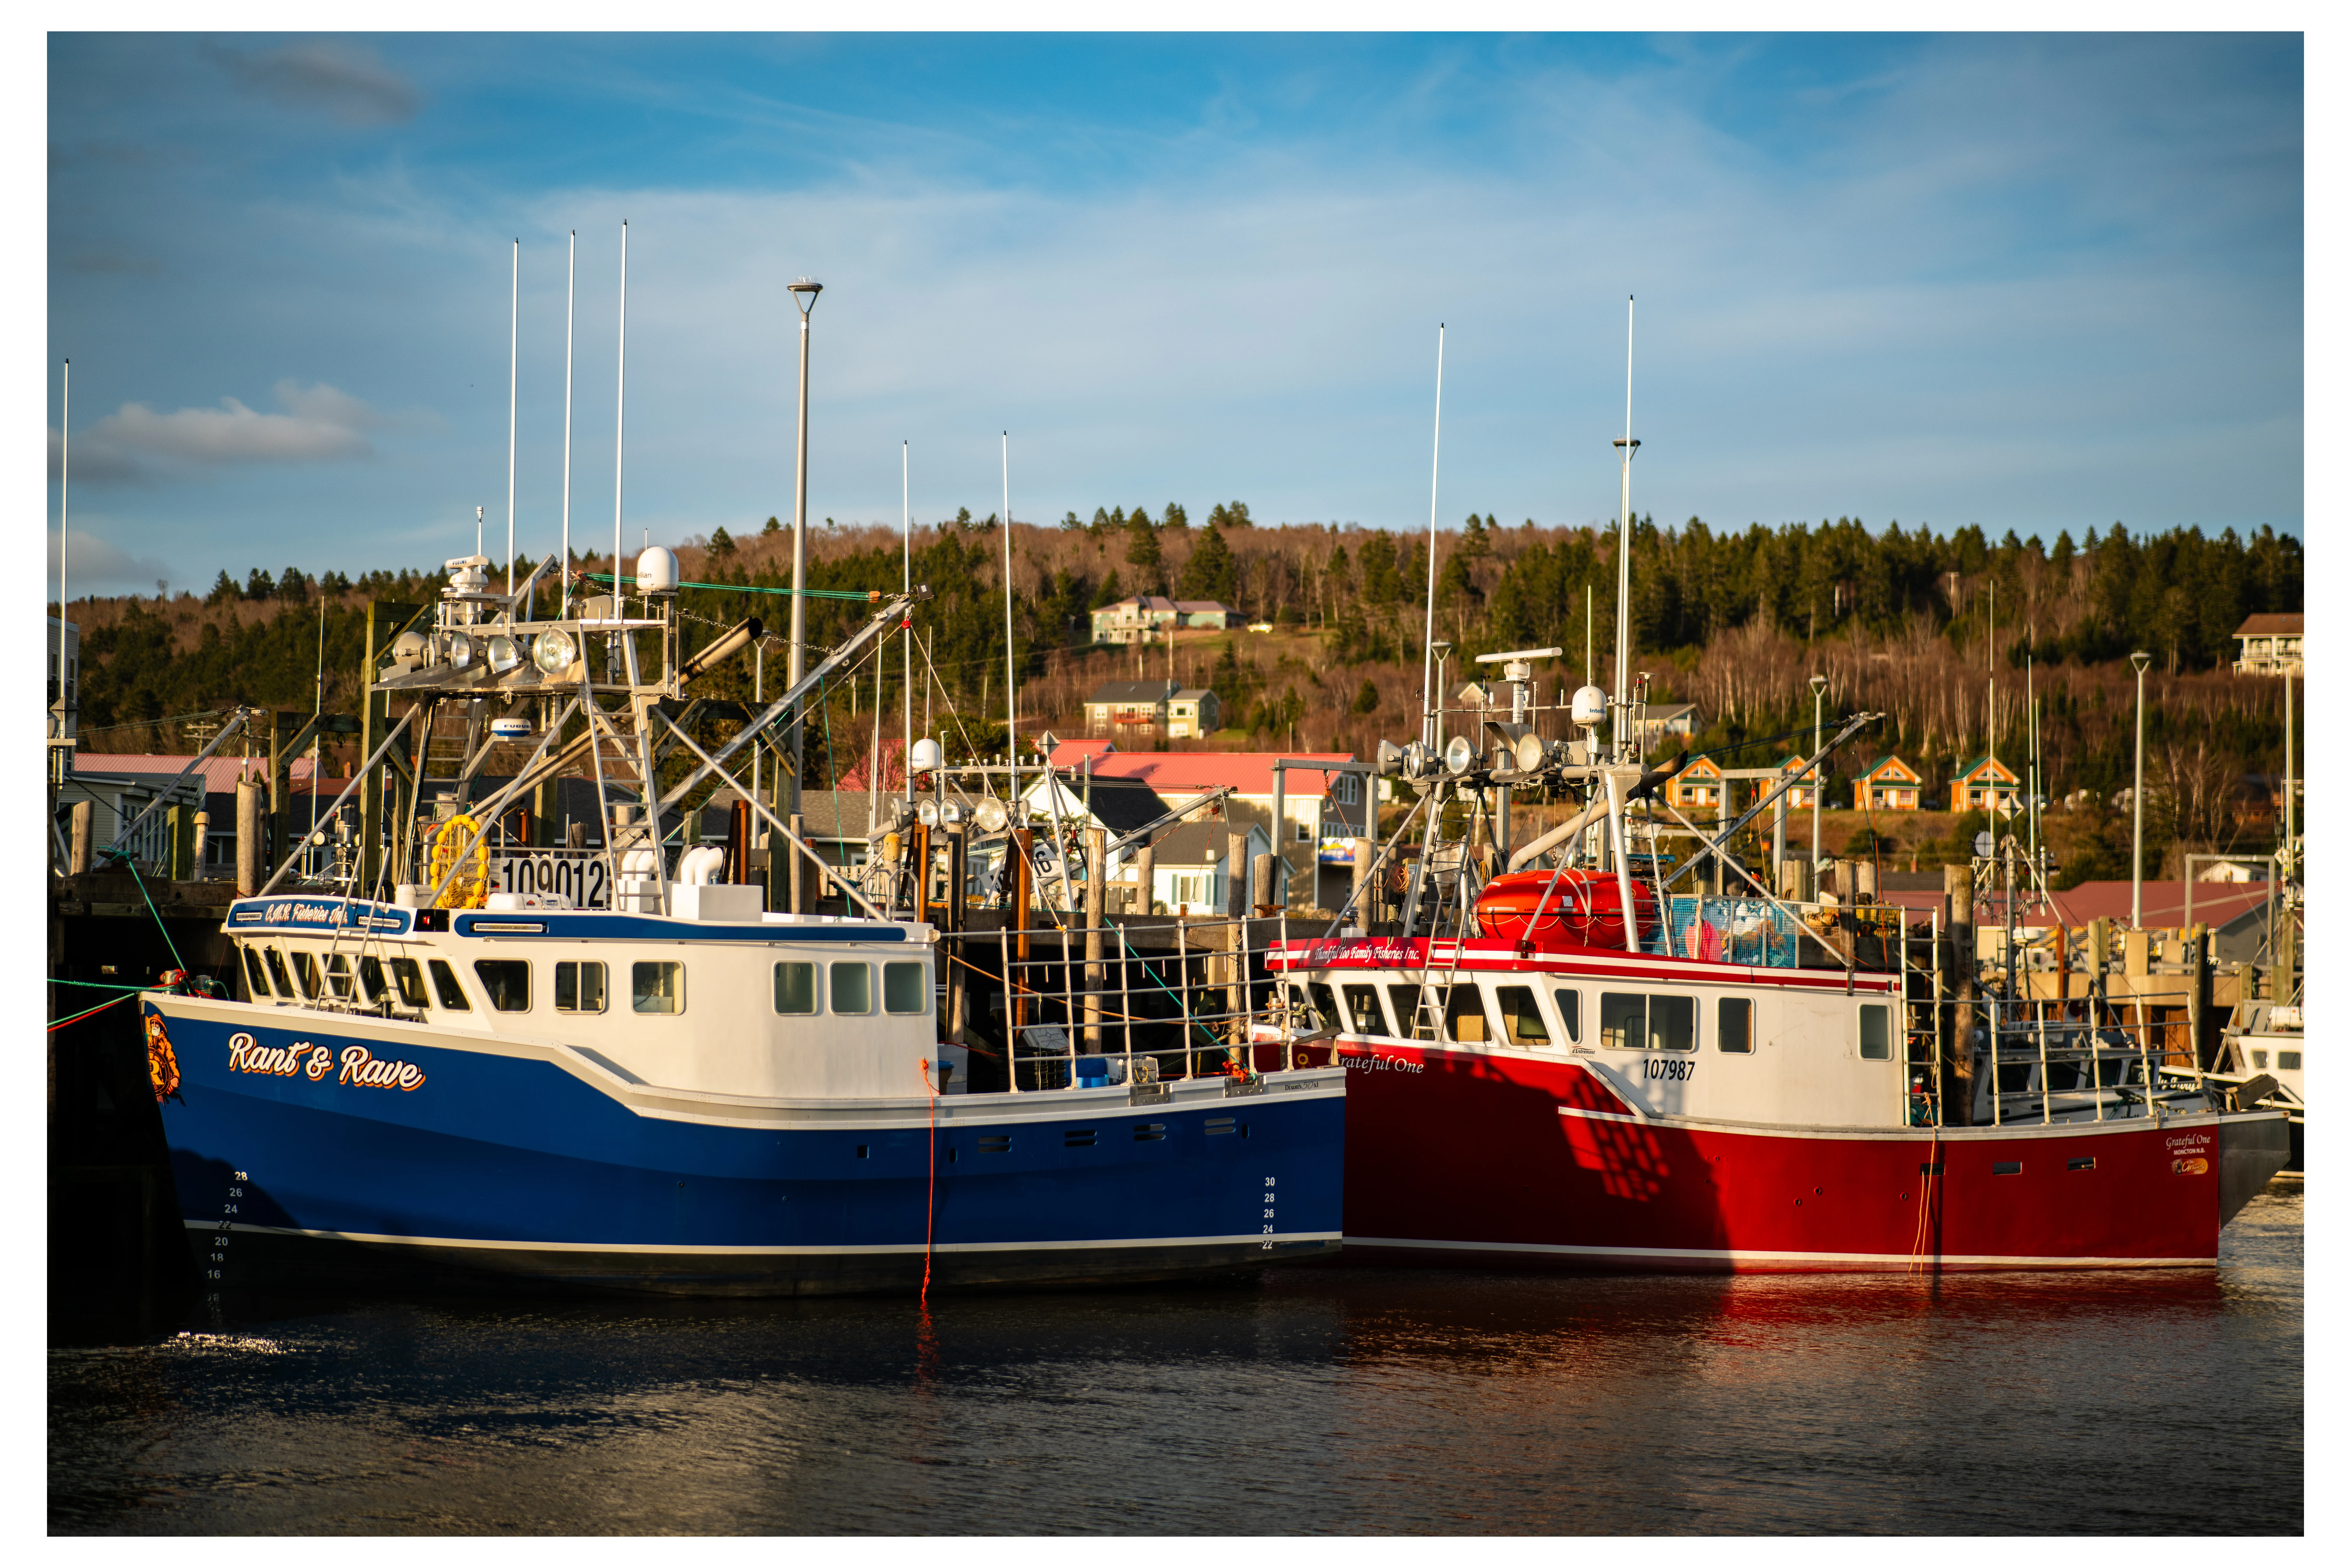 Boats in Fundy/Alma at Sunset